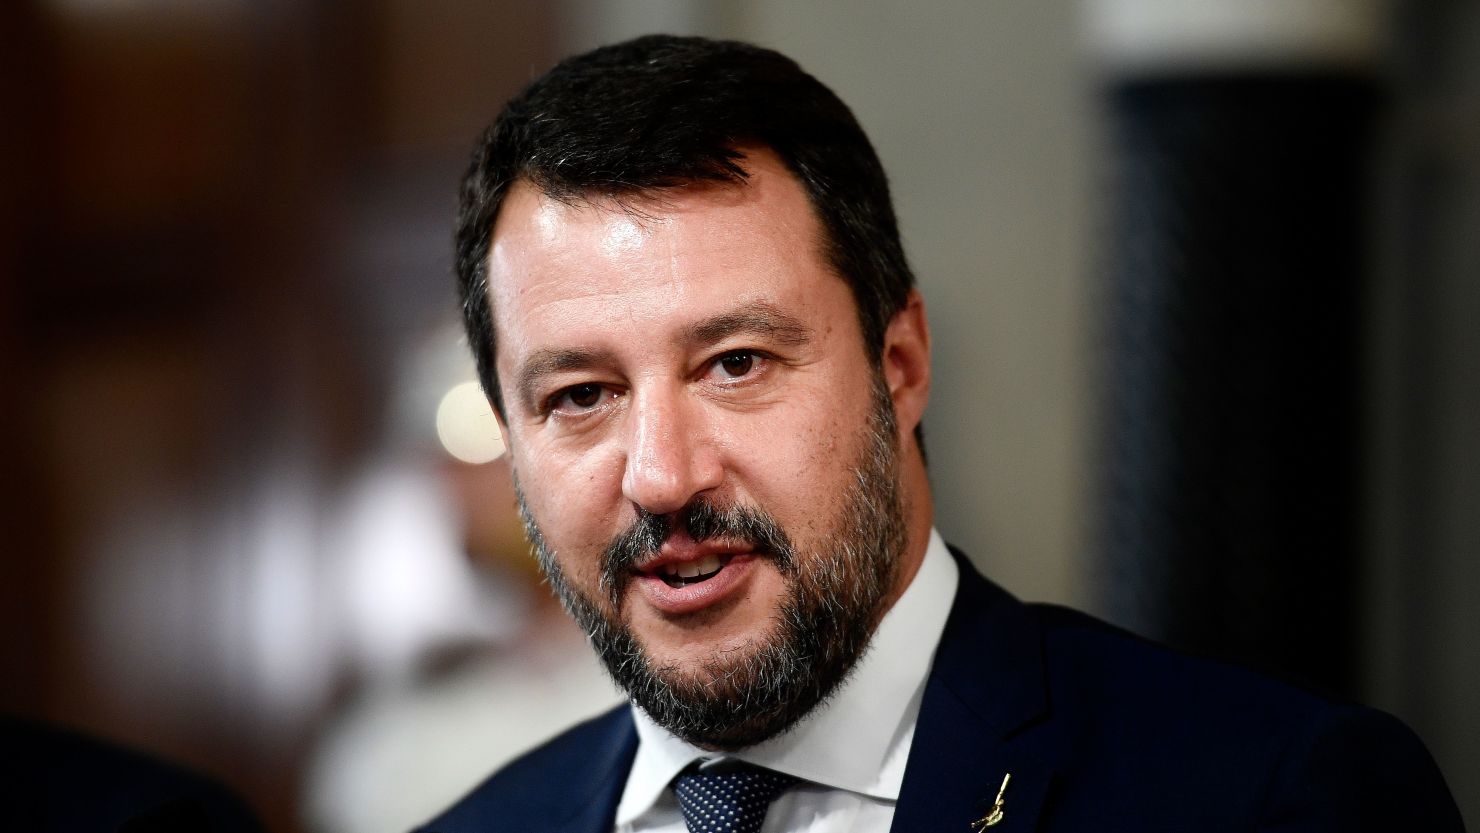 Salvini could face trial over treatment of migrants | CNN